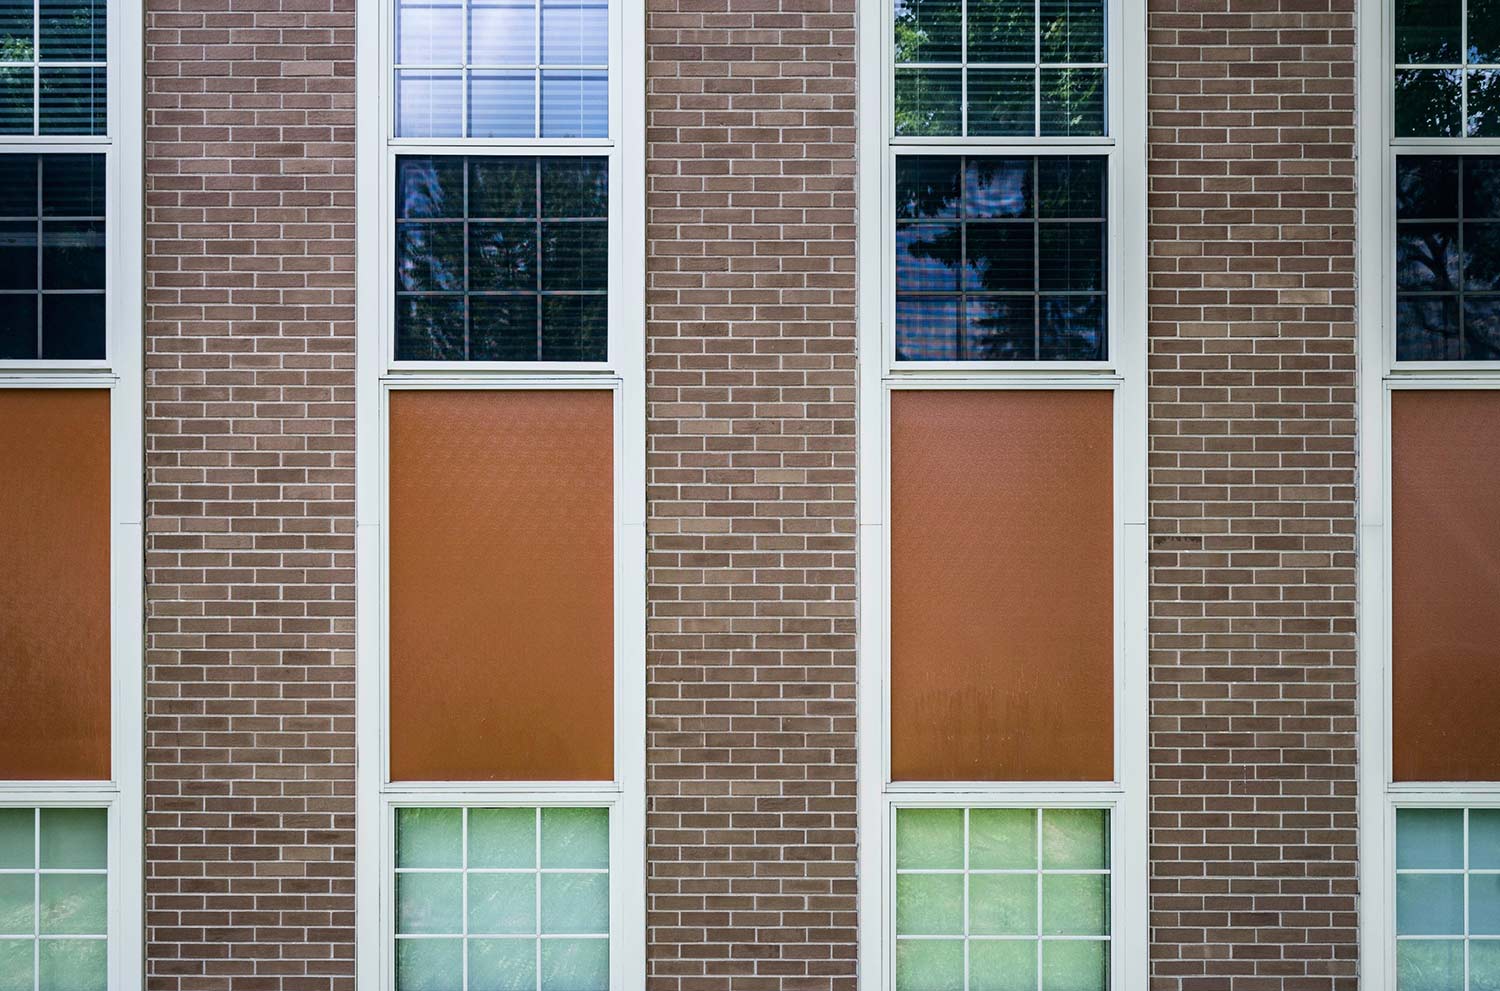 Outside wall of an industrial-looking building, with rows of windows and bricks